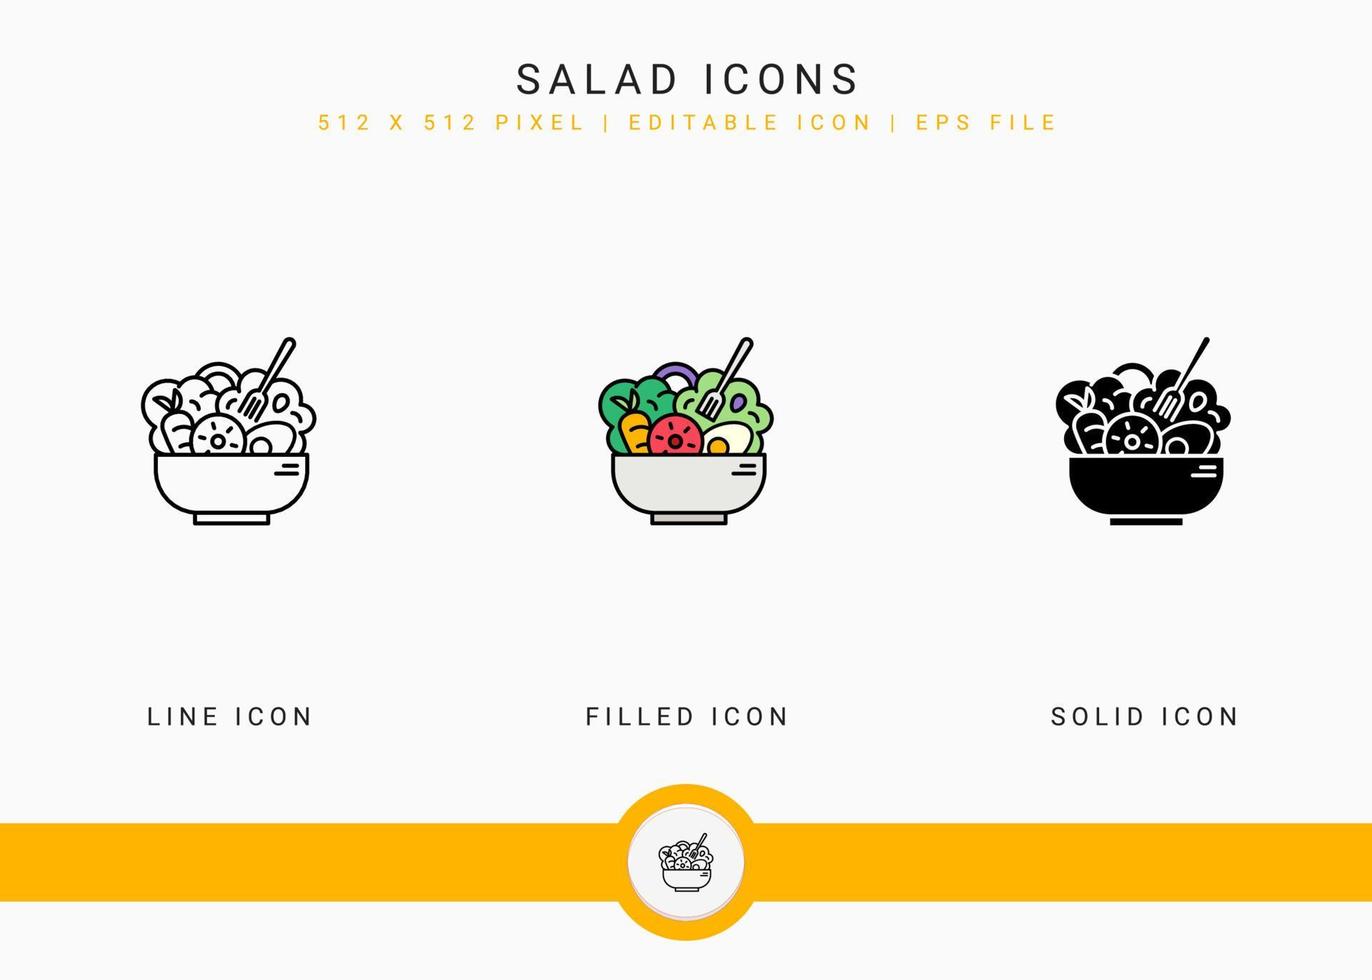 Salad icons set vector illustration with solid icon line style. Vegetables bowl nutrition concept. Editable stroke icon on isolated white background for web design, user interface, and mobile app